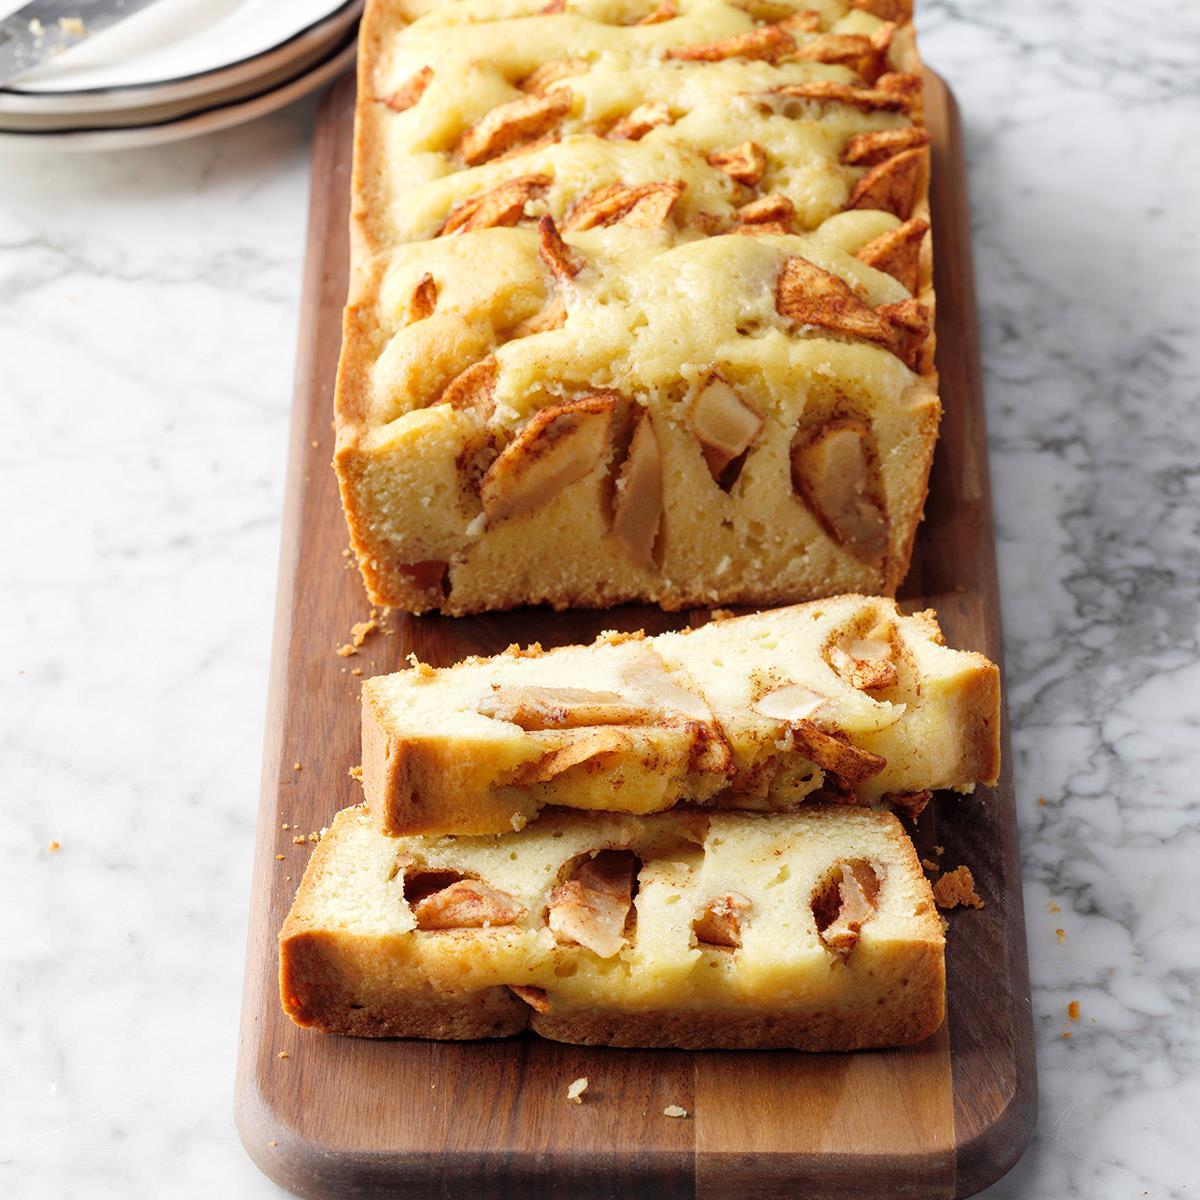 Easy French Apple Cake - A Baking Journey